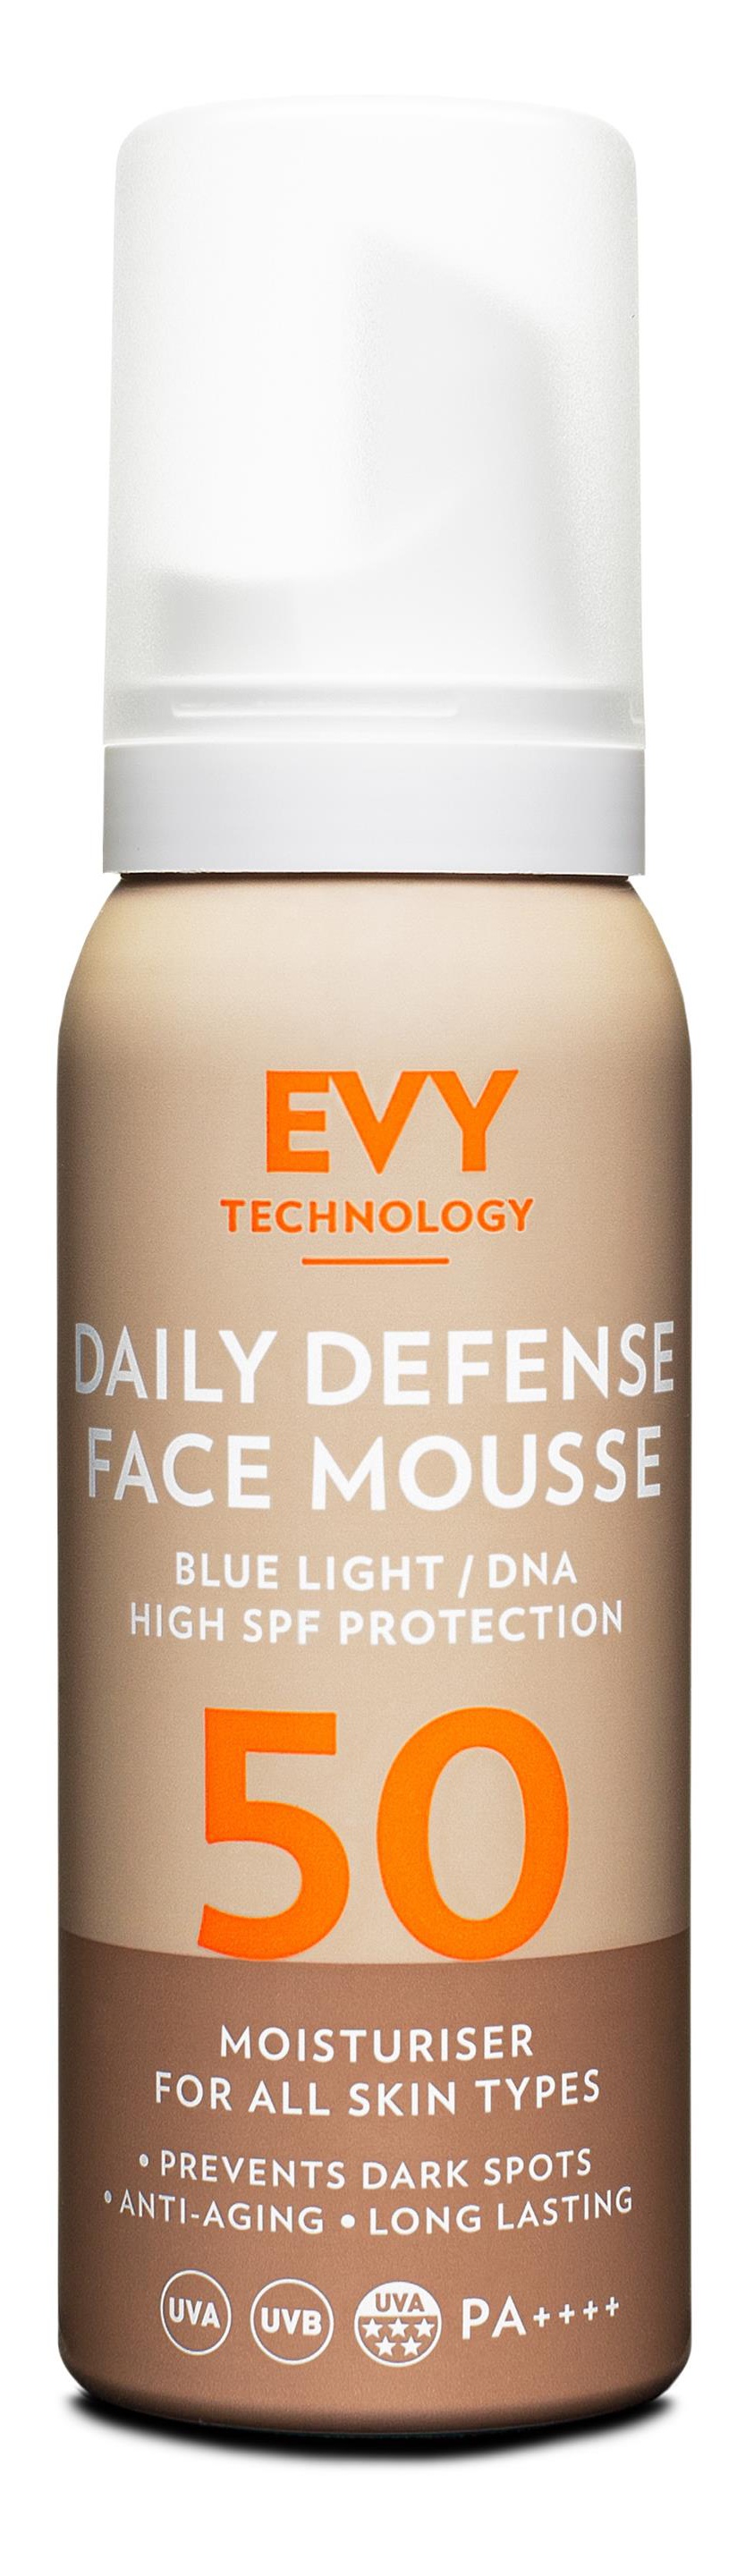 Evy Daily Defense Face Mousse Spf 50